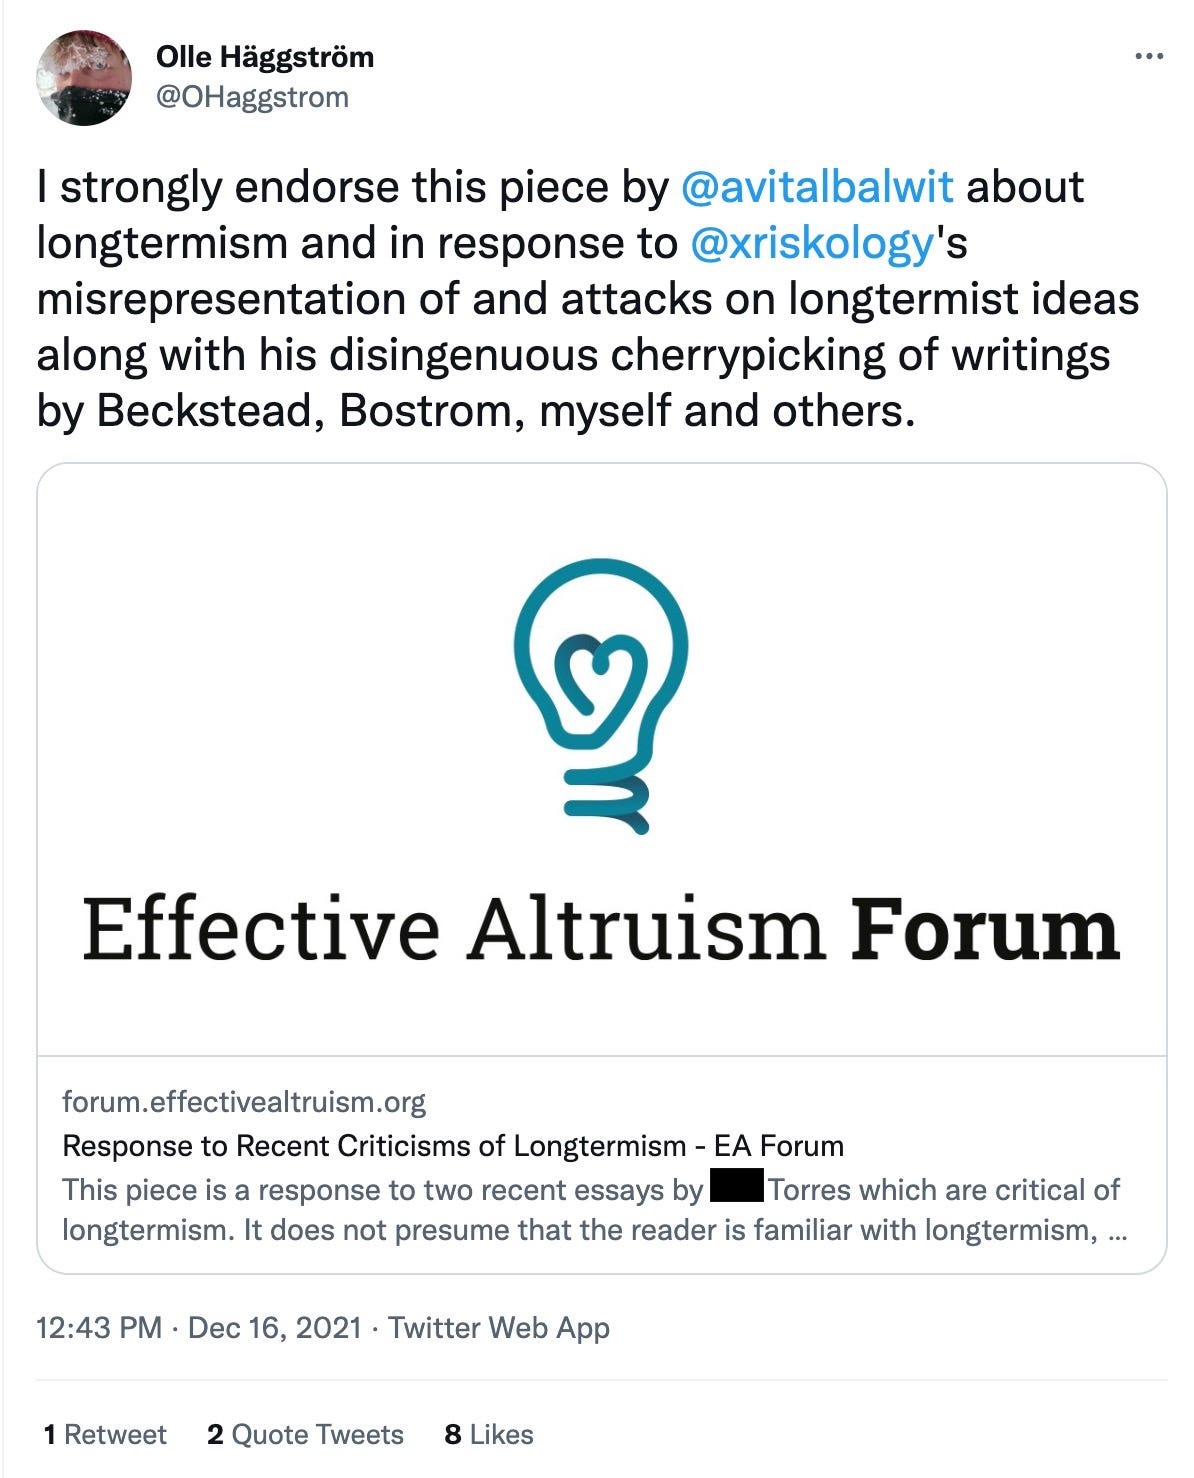 Olle Häggström: I strongly endorse this piece by Avital Balwit about longtermism and in response to xriskology's misrepresentation of and attacks on longtermist ideas along with his disingenuous cherrypicking of writings by Beckstead, Bostrom, myself and others. 